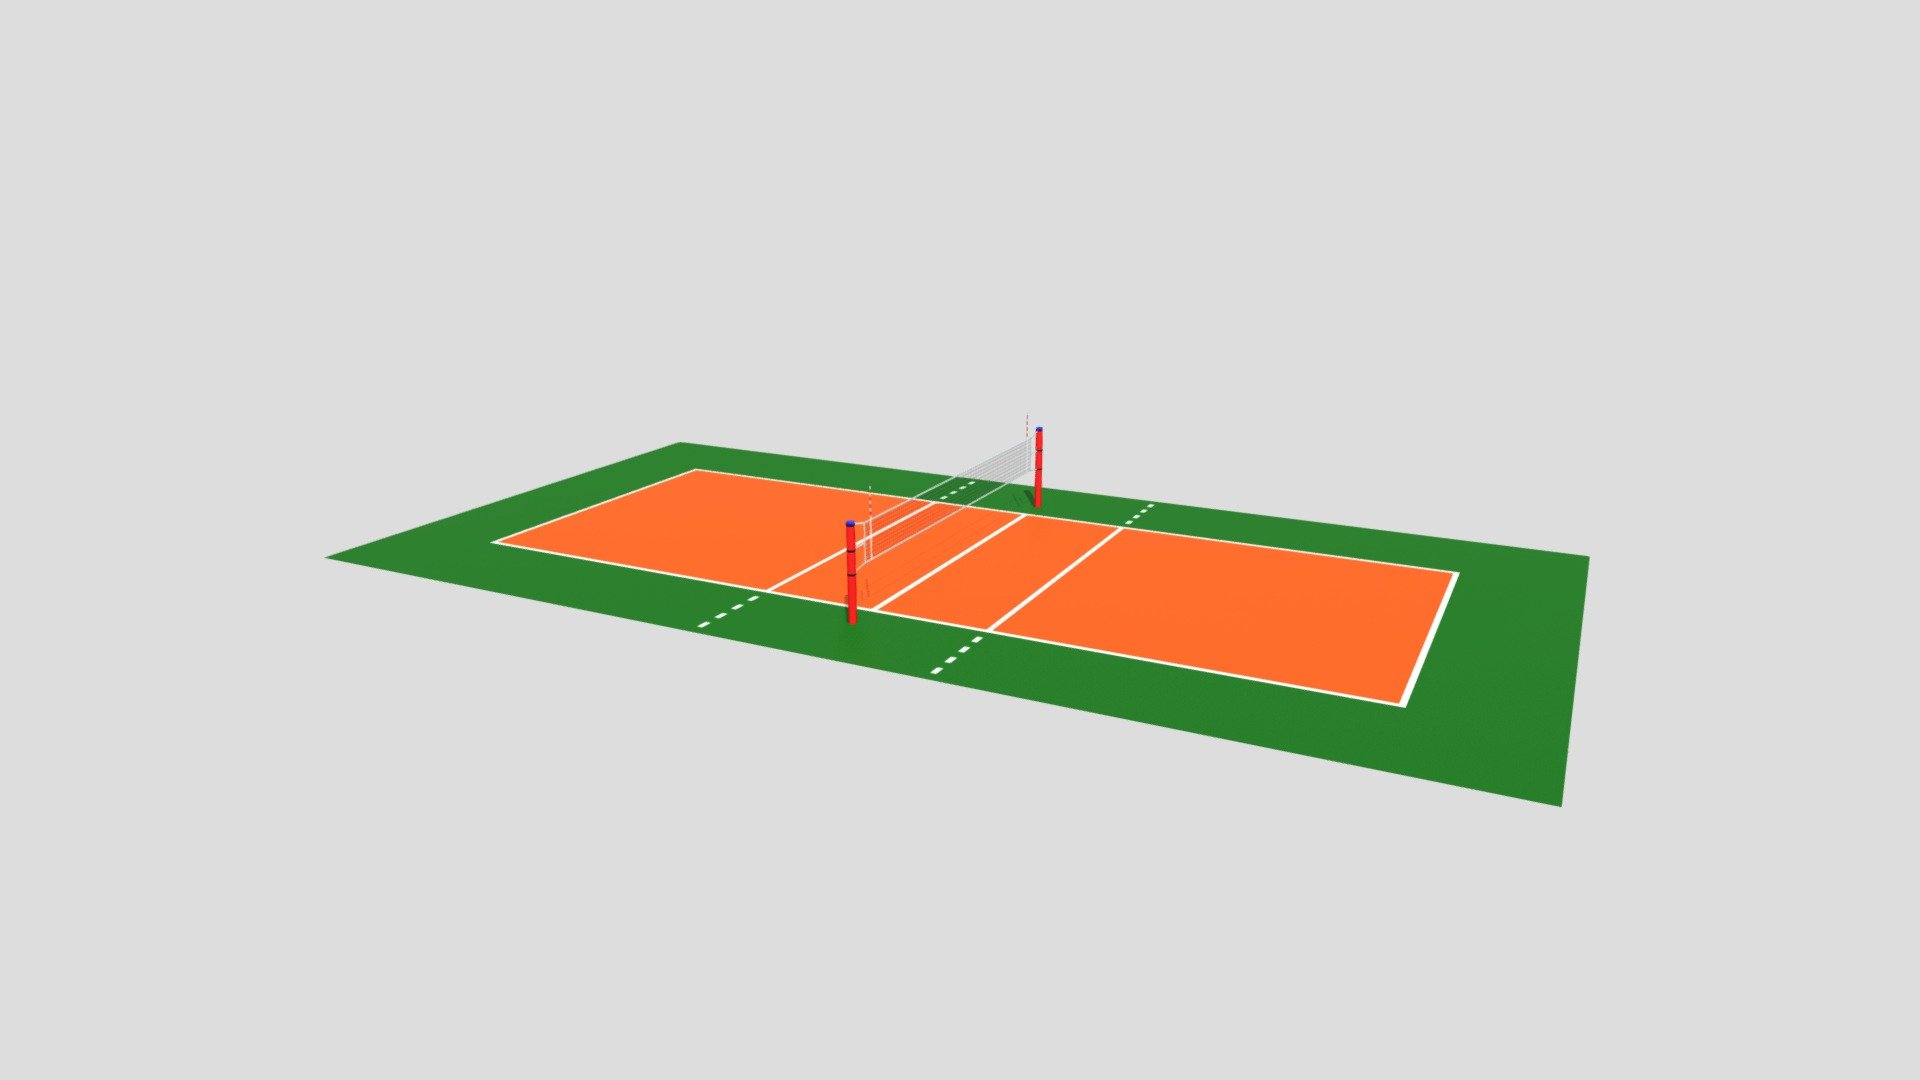 Volleyball Court Dimensions & Drawings | Dimensions.com